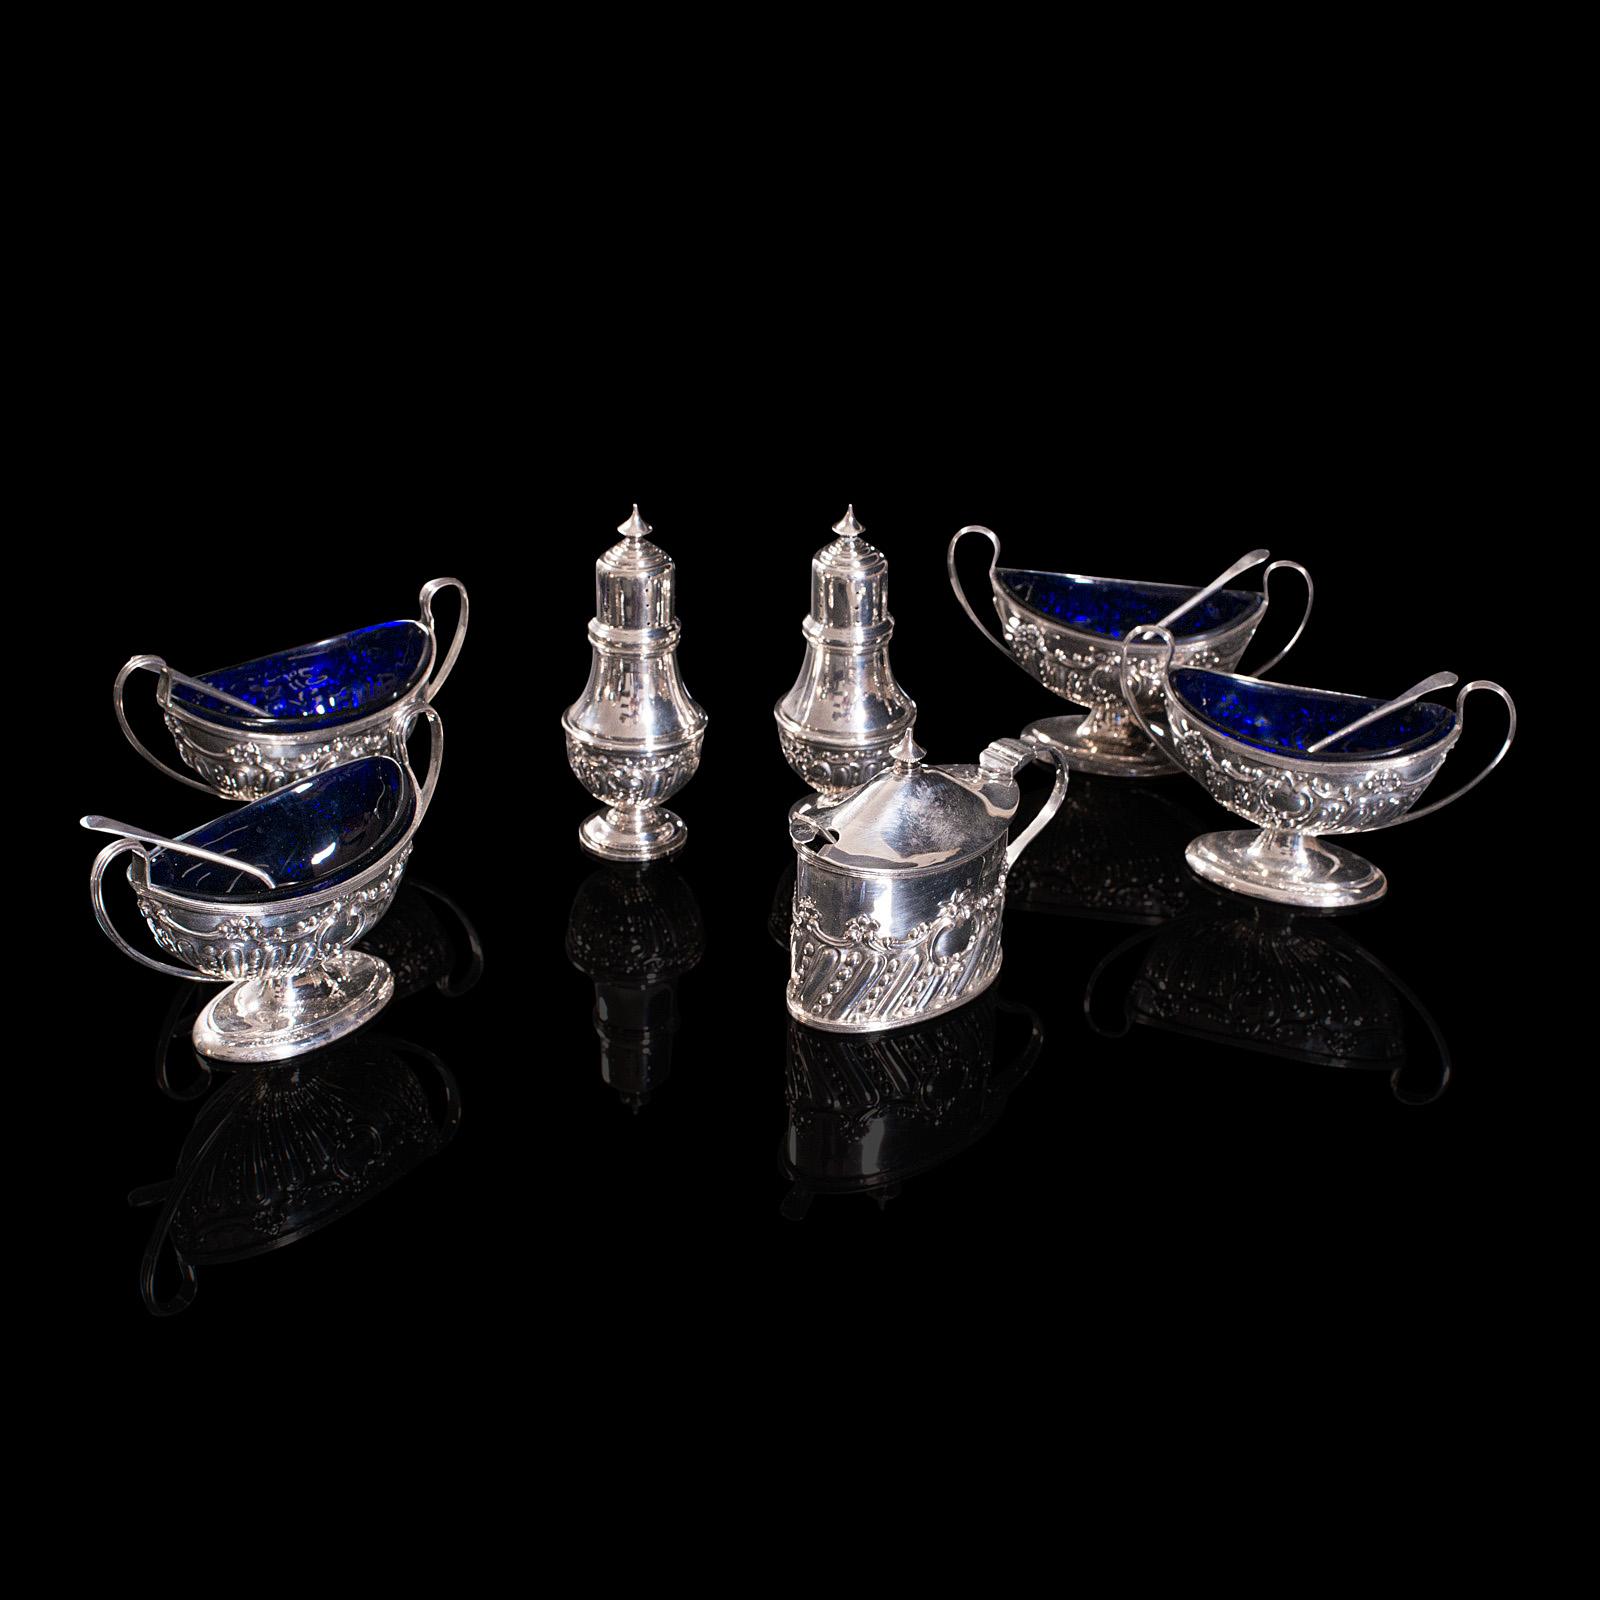 This is an antique decorative condiment set. An English, sterling silver boxed set by Henry Matthews of Birmingham, hallmarked in the Edwardian period, dated 1909.

A fine set, presented wonderfully within the original quality case
Displaying a